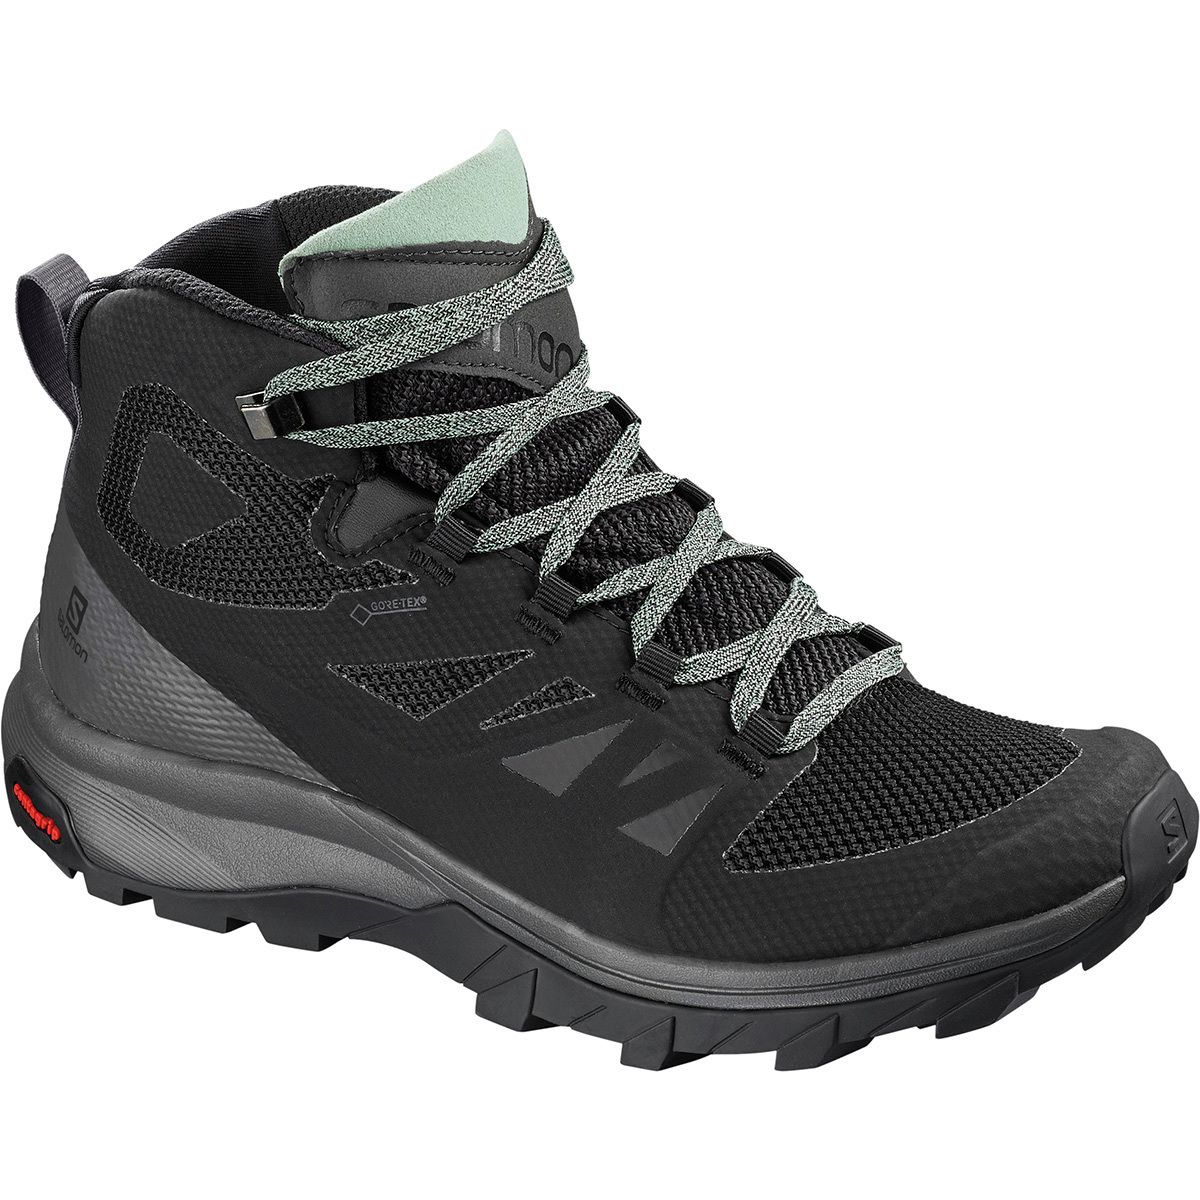 Outline Mid GTX Hiking Boot - Women